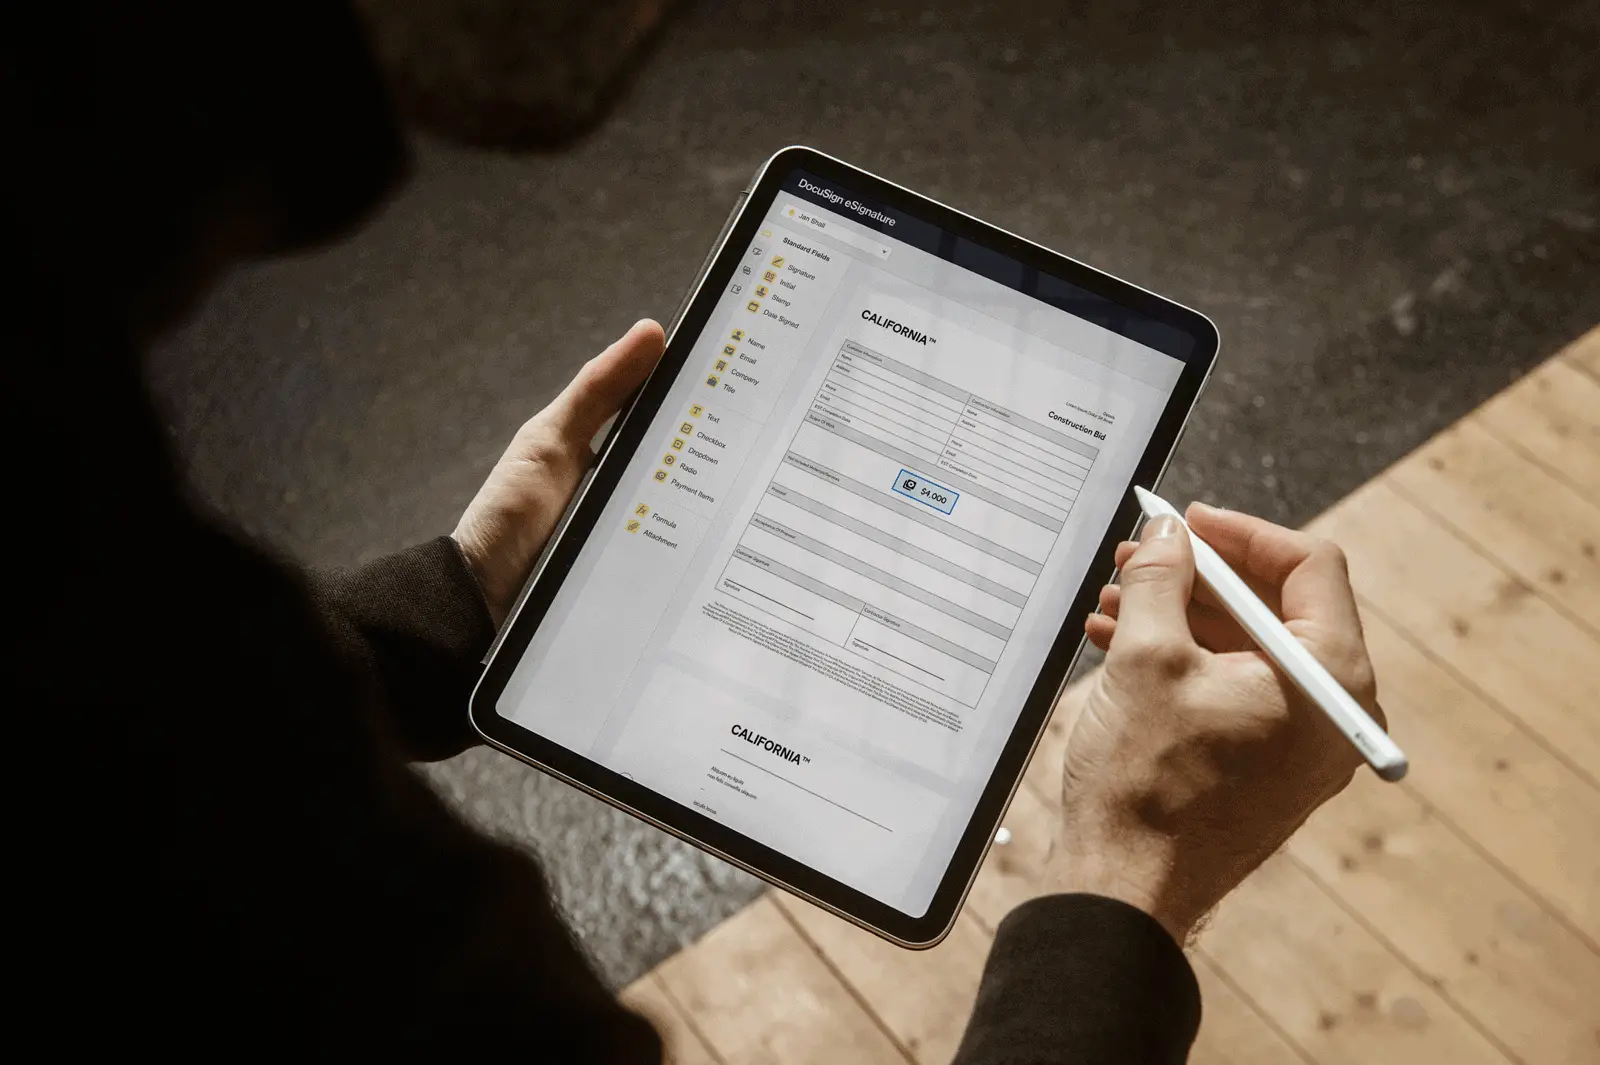 A person fills out a form on a tablet with a stylus